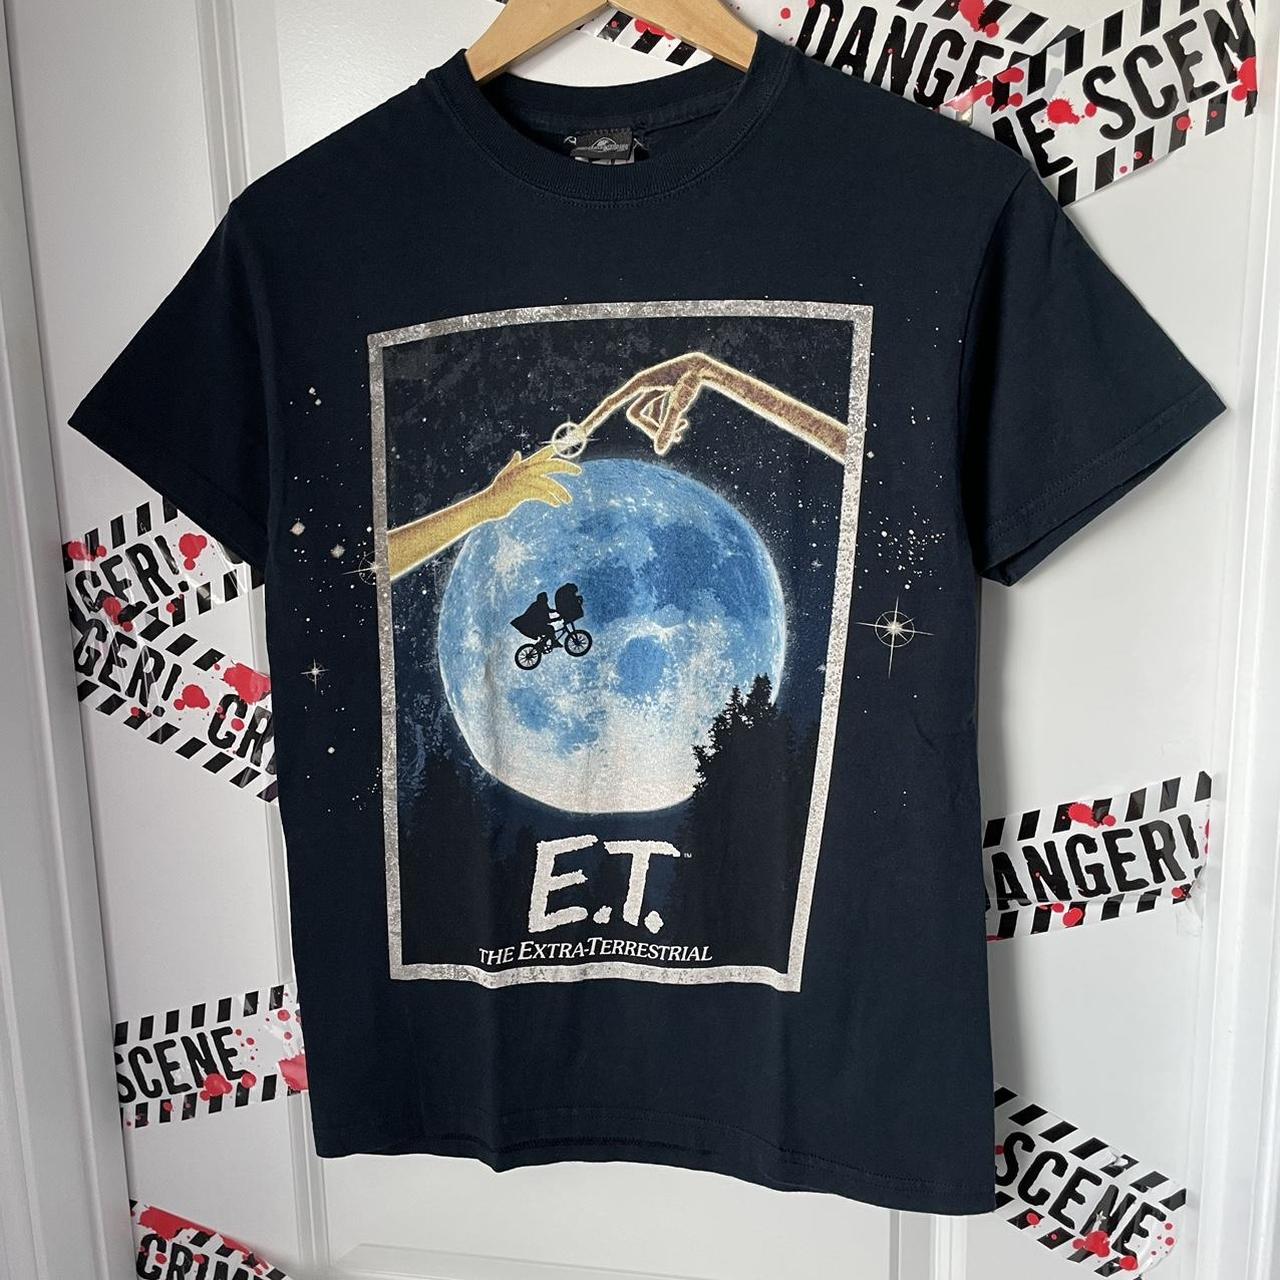 Vintage E.T. the extra-terrestrial t-shirt, Tagged...